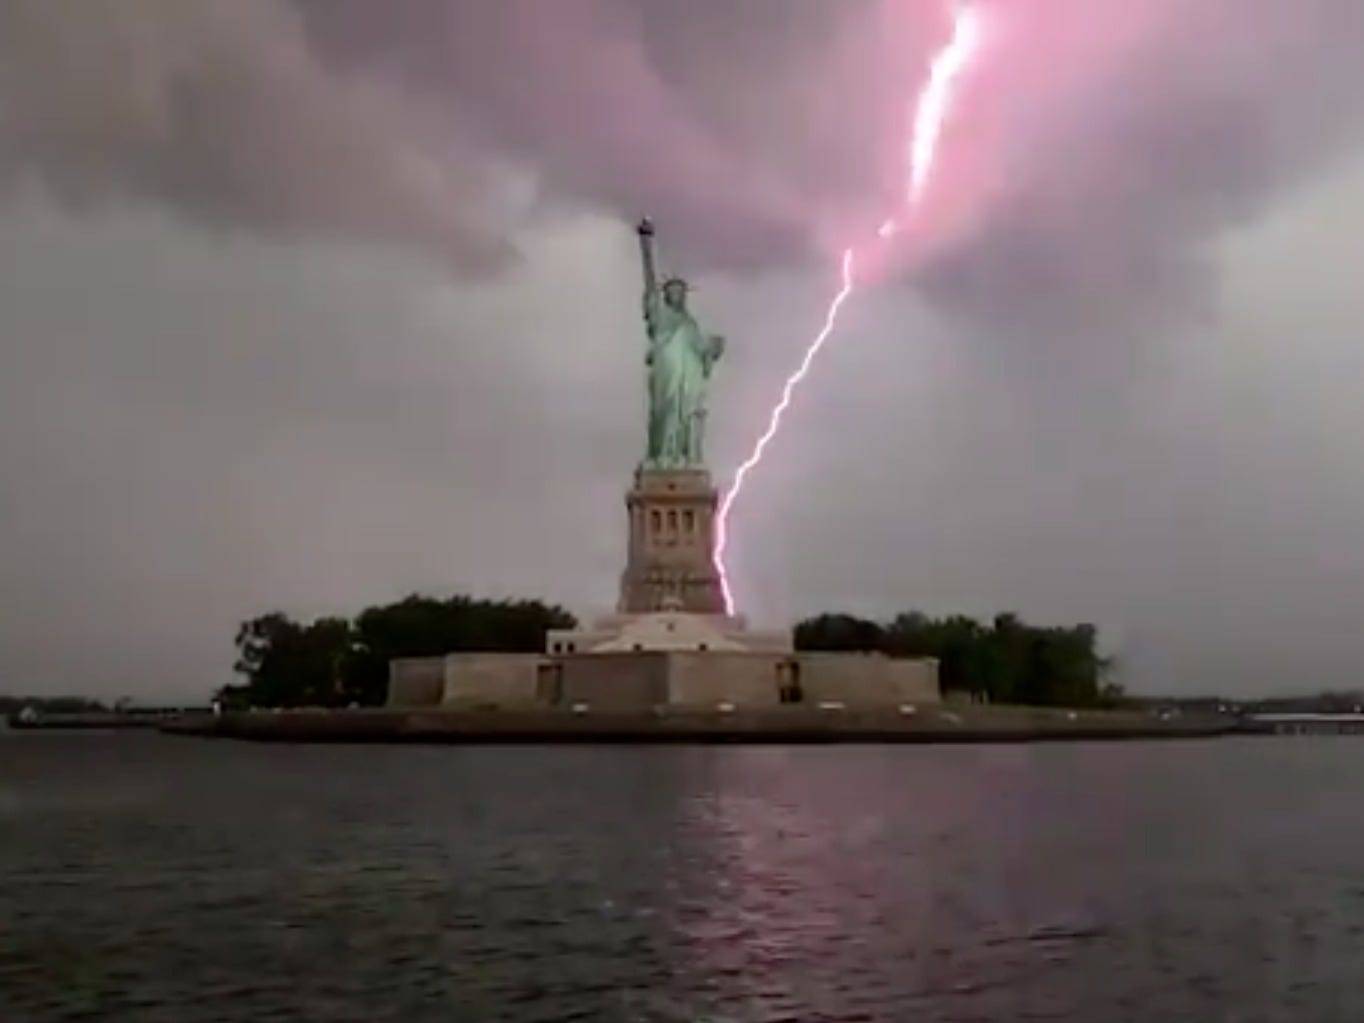 A stunning video shows the Statue of Liberty being struck by lightning